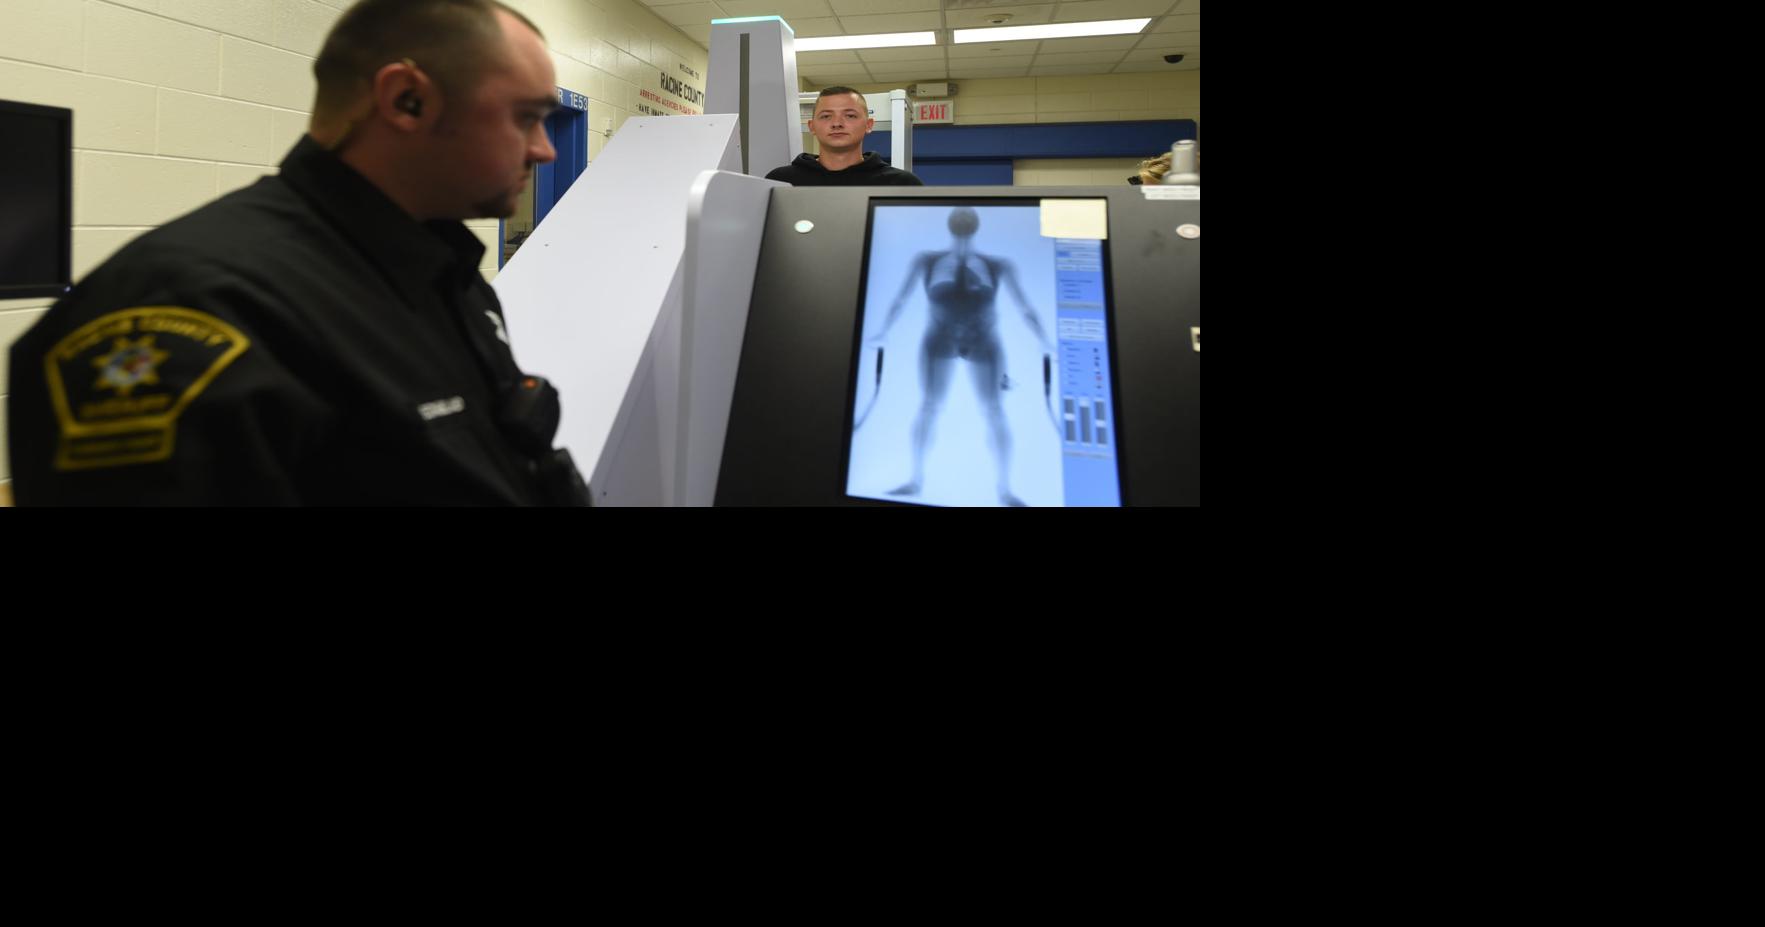 Sheriff: Jail's new body scanners are a 'lifesaver